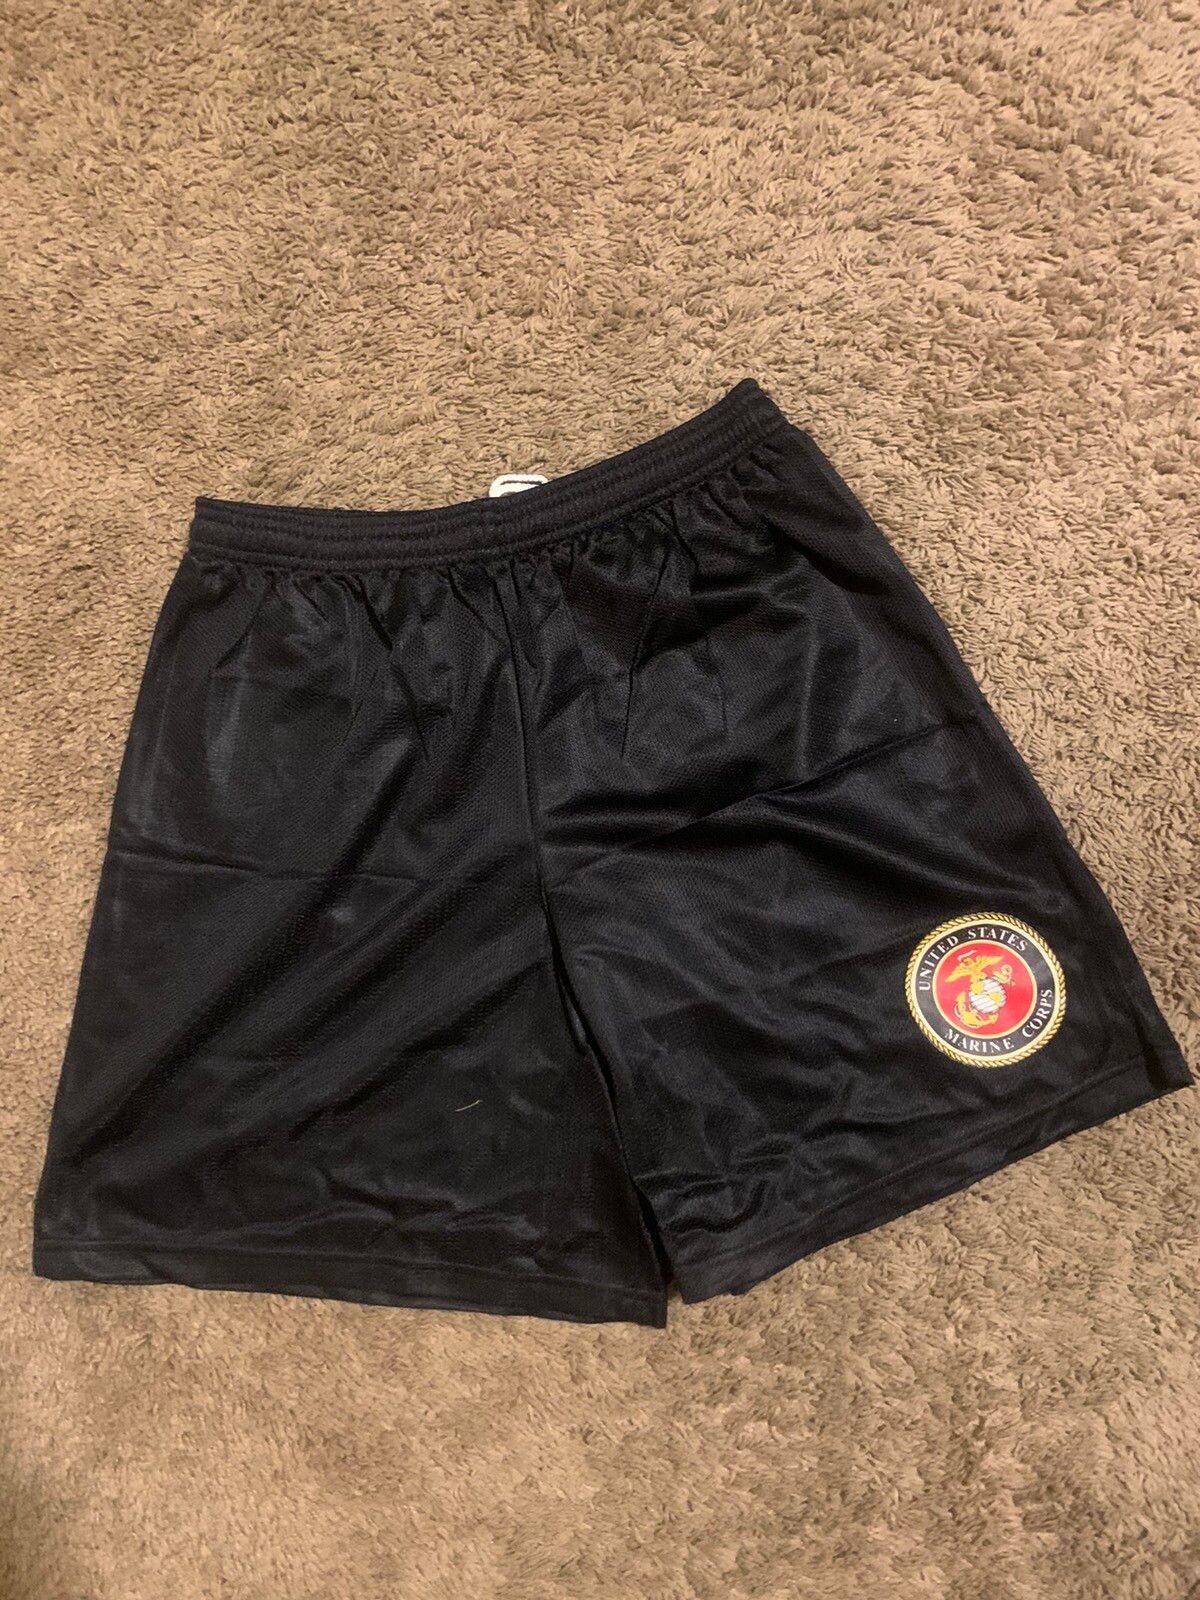 Jerzees Vintage United States marine corps shorts 90s size medium Size US 34 / EU 50 - 1 Preview